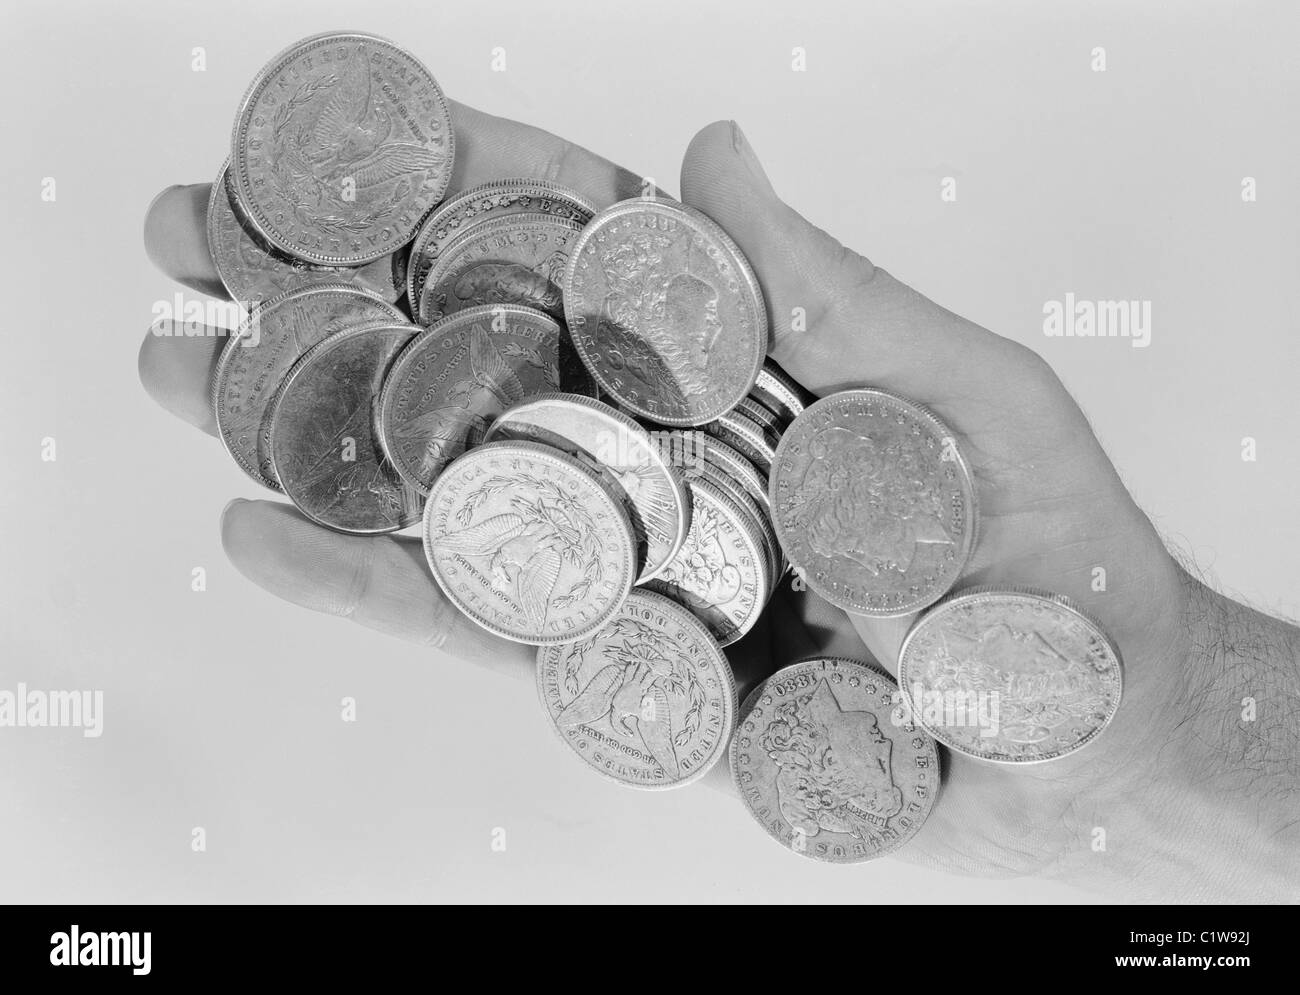 Hand holding old coins Stock Photo